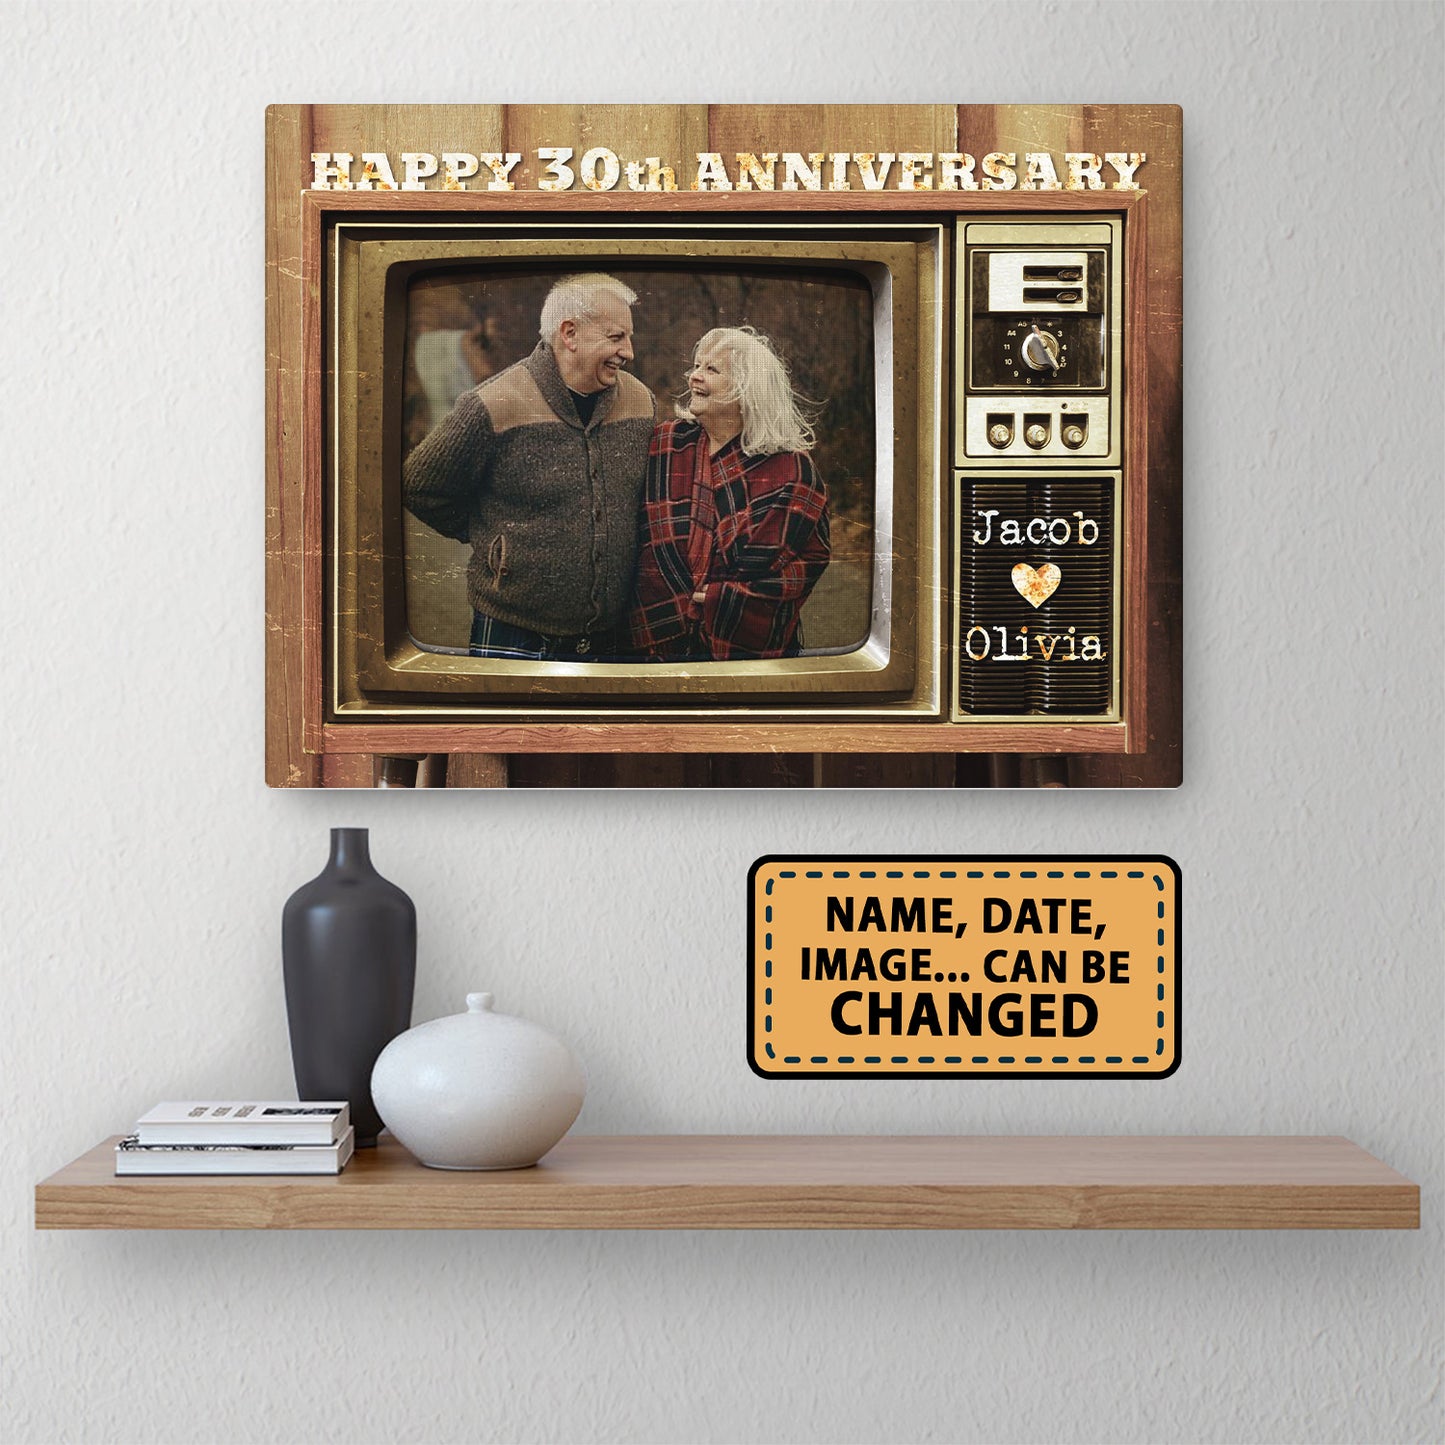 Happy 30th Anniversary Old Television Custom Image Canvas